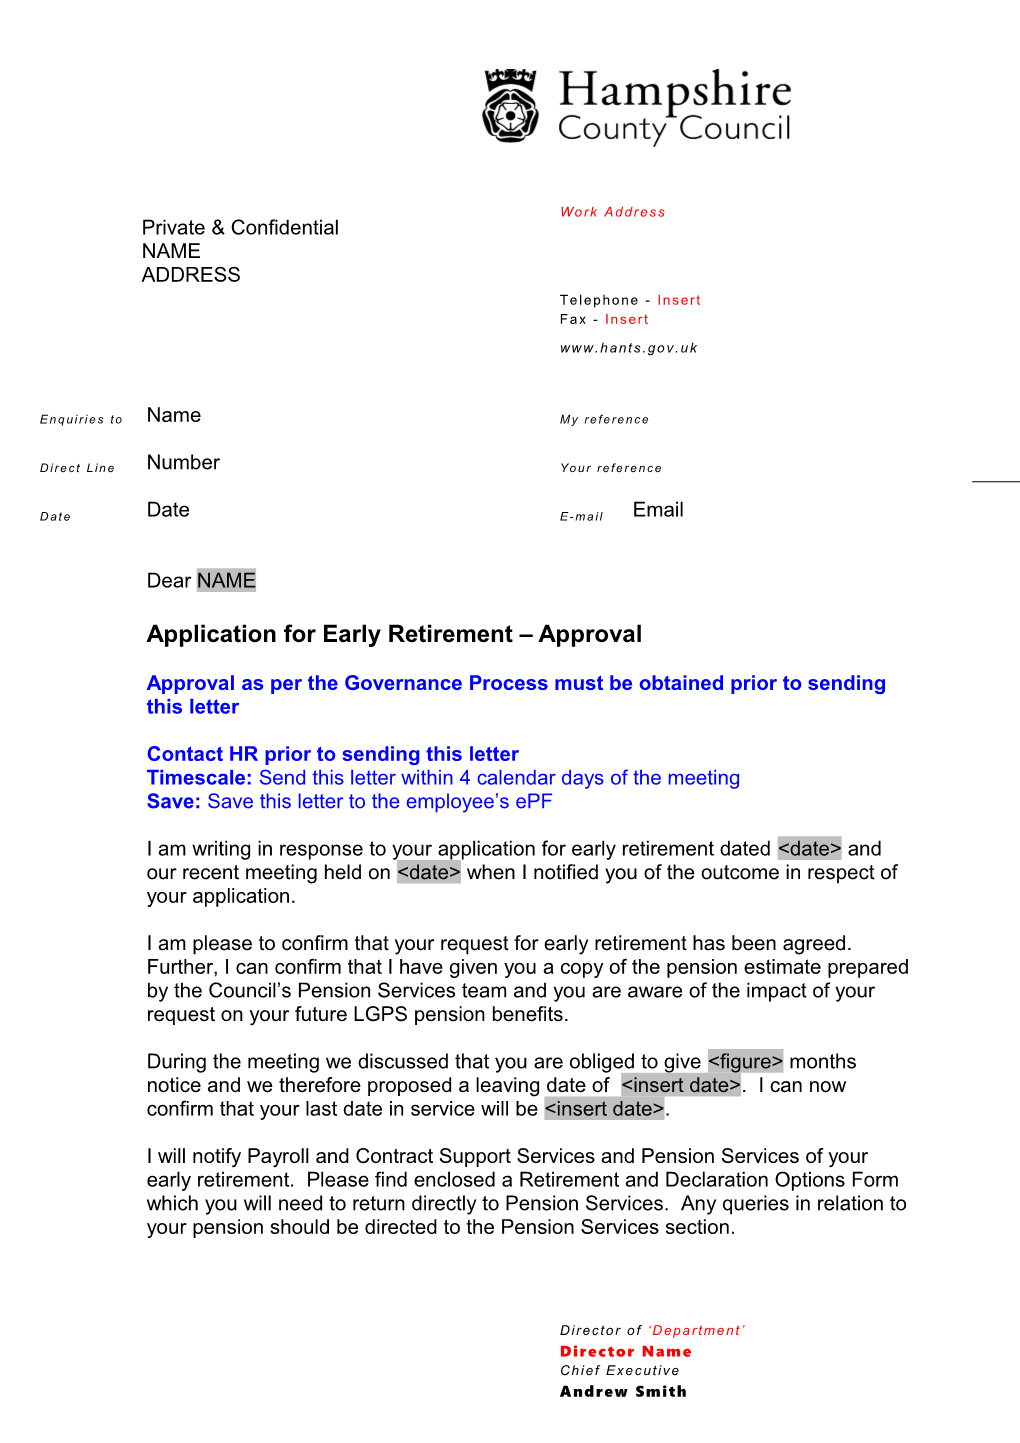 Application for Early Retirement Approval